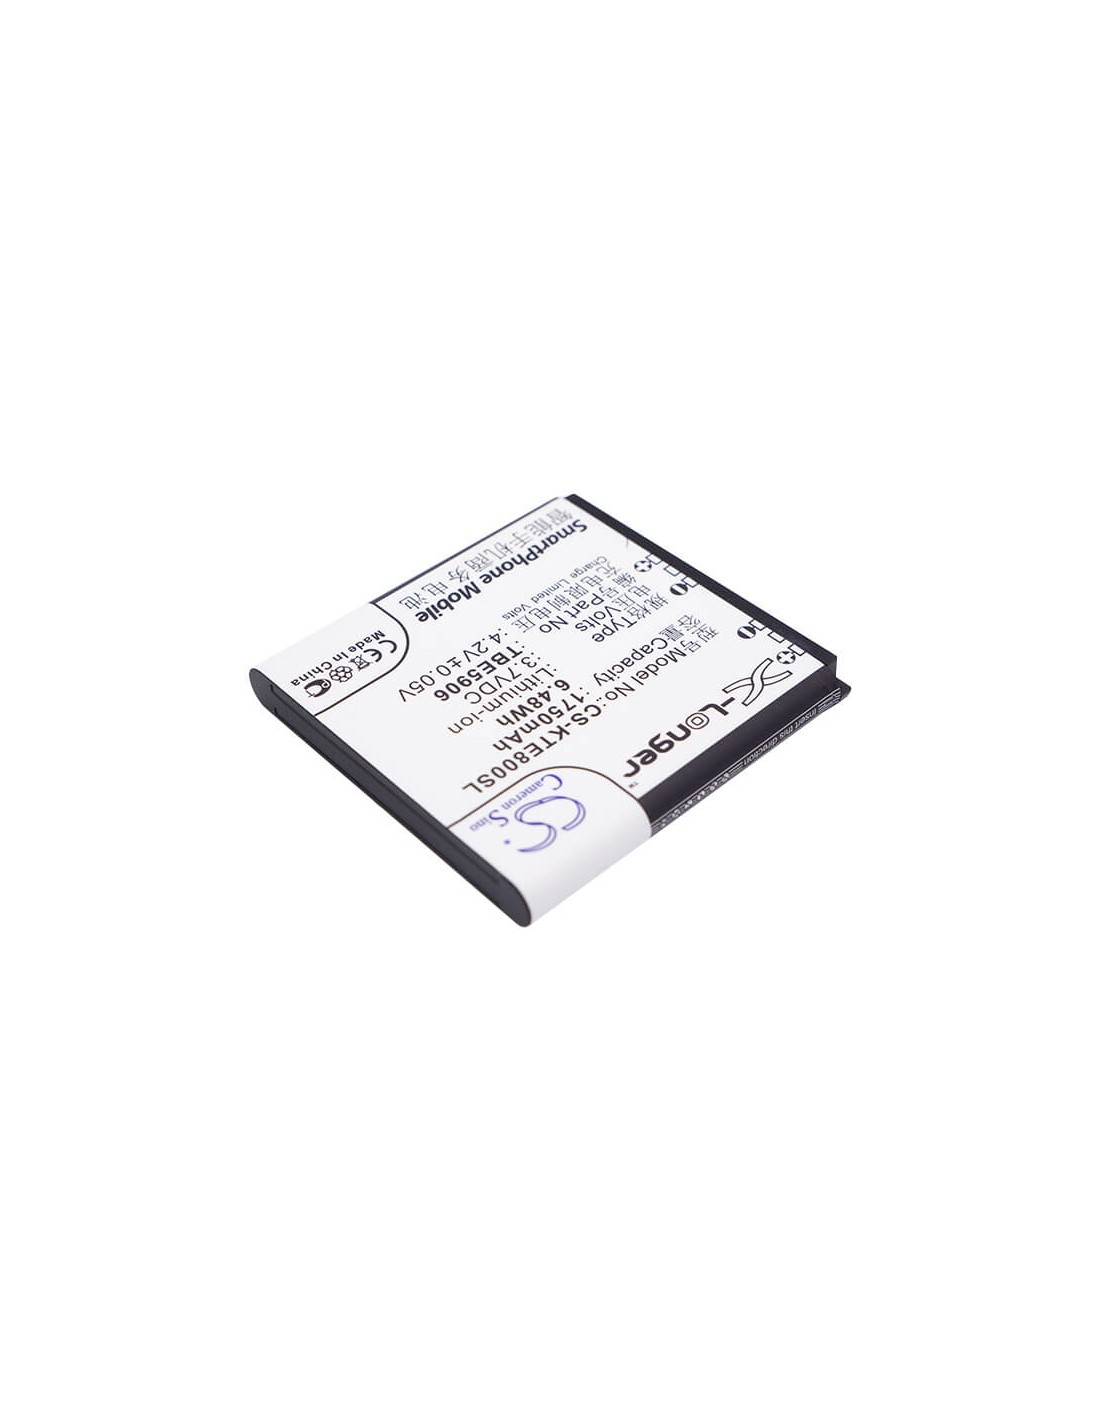 Battery for K-Touch W688, E800, W808 3.7V, 1750mAh - 6.48Wh